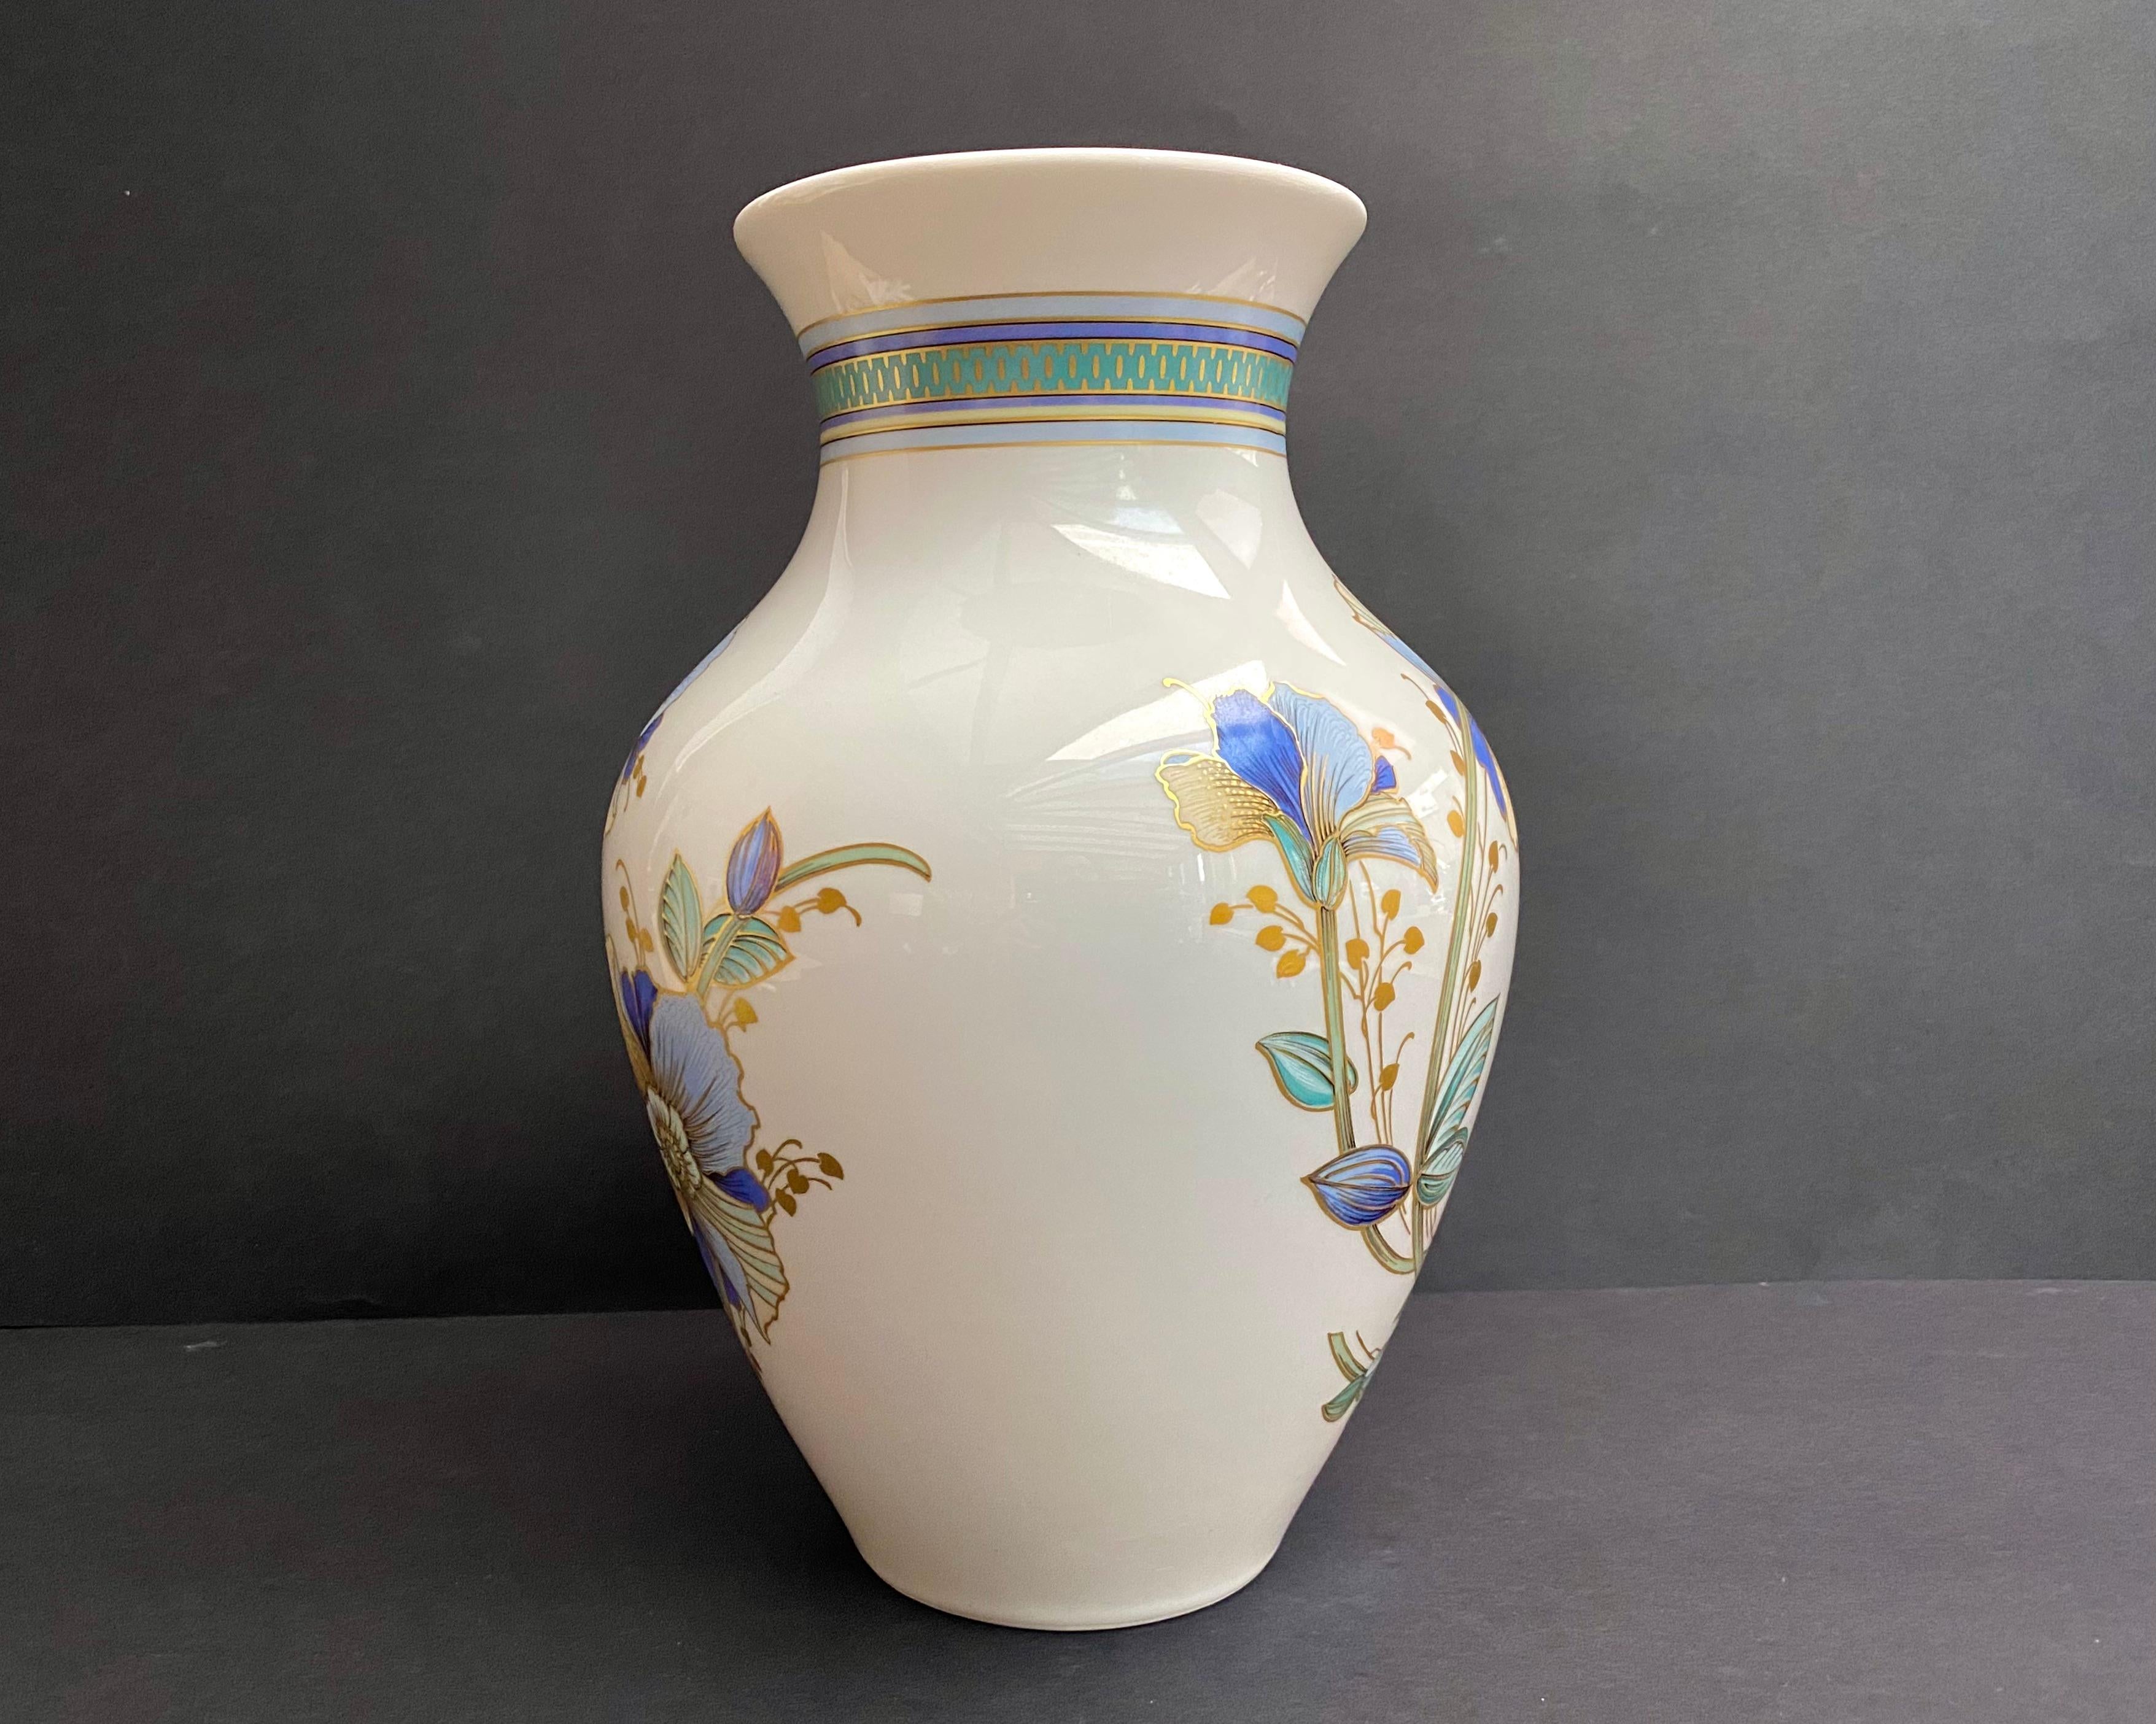 Beautiful vintage vase/jar in porcelain with gold plating.

Circa 1970s, manufactured in Germany.

Stamped and numbered.

Hand-painted floral motif.

With this vase you can create comfort and harmony in any room.

The vase is very practical and easy